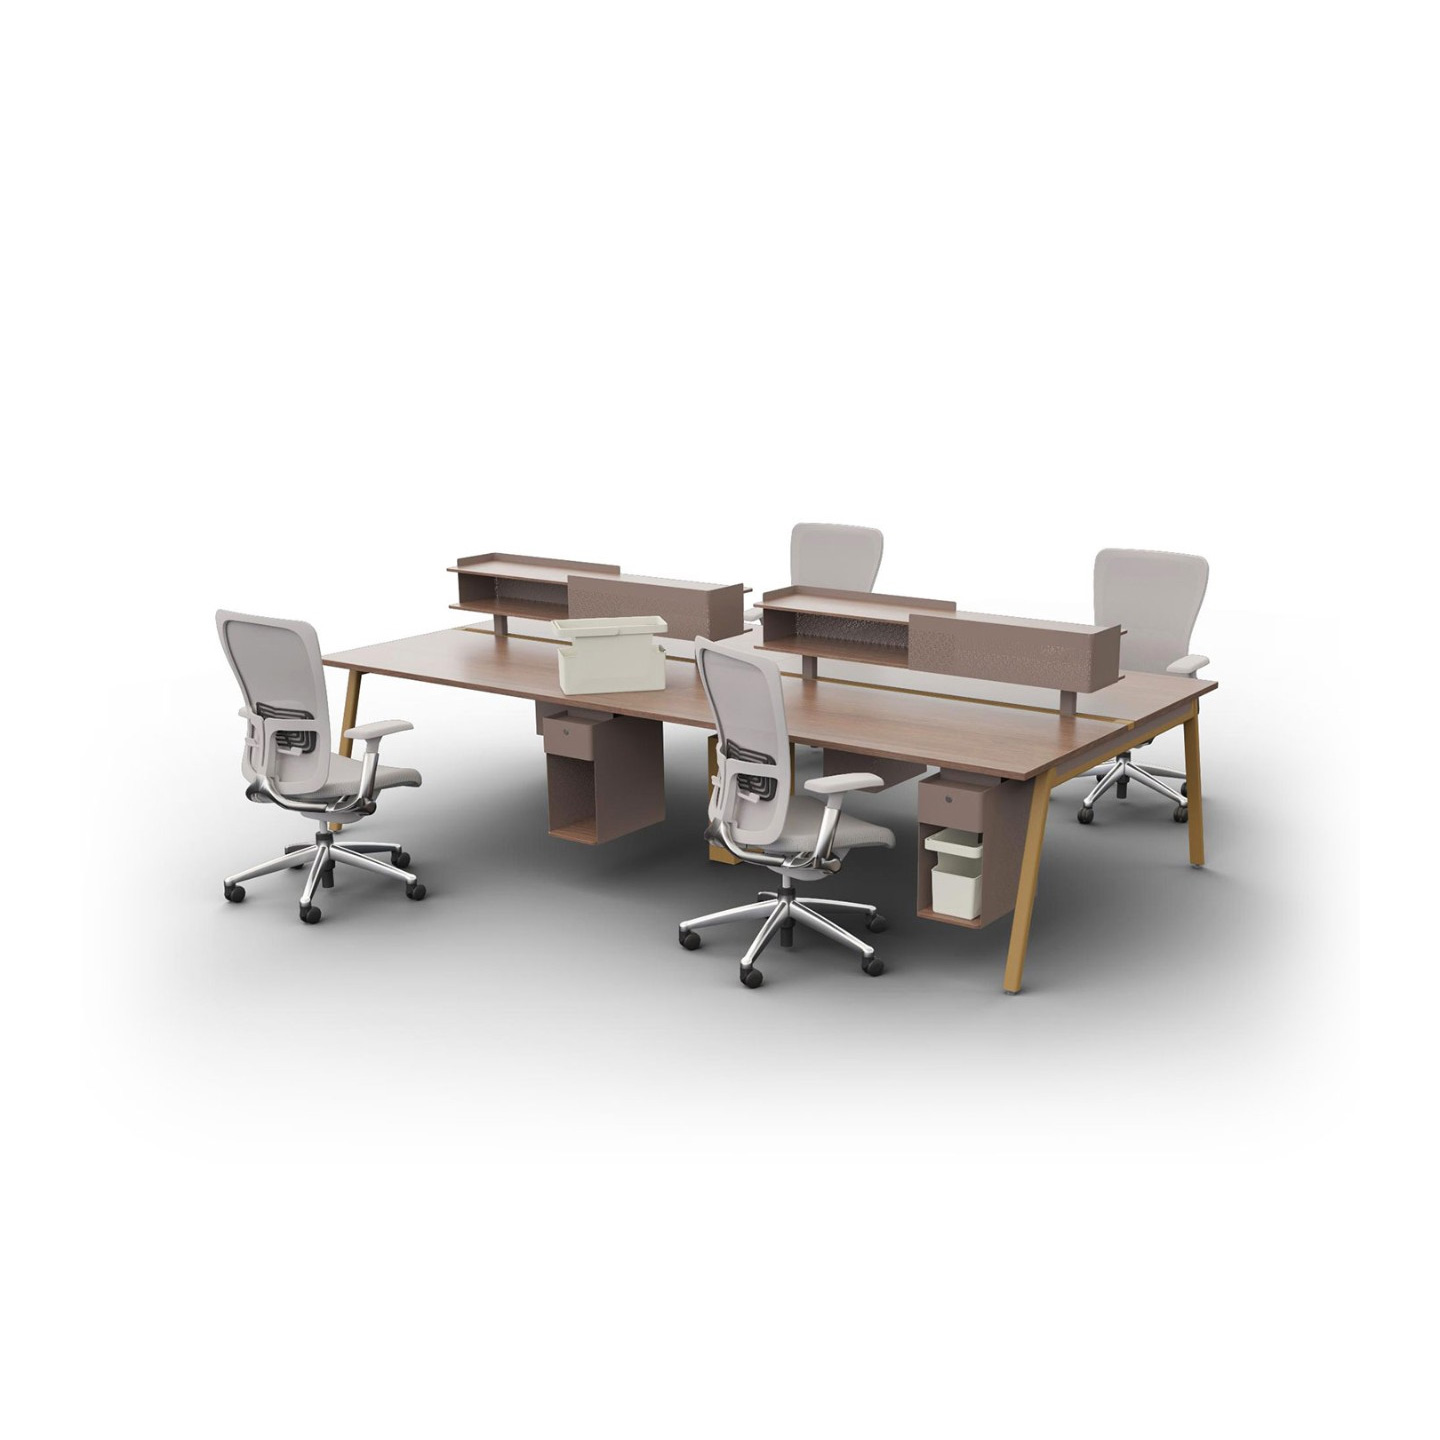 Active Components with four individual workspace with Zody chairs in gray.